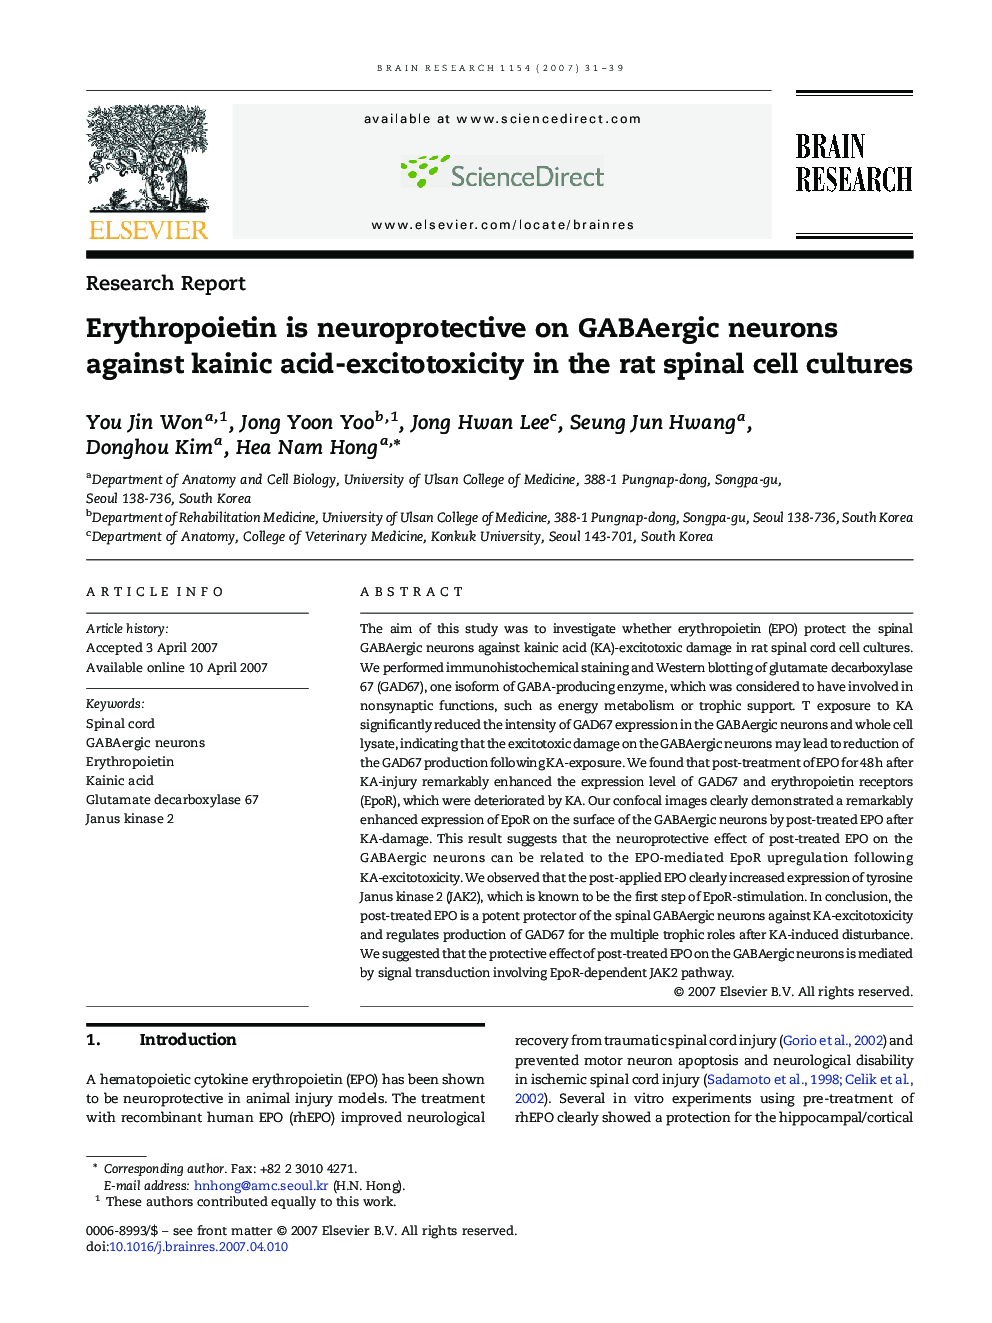 Erythropoietin is neuroprotective on GABAergic neurons against kainic acid-excitotoxicity in the rat spinal cell cultures